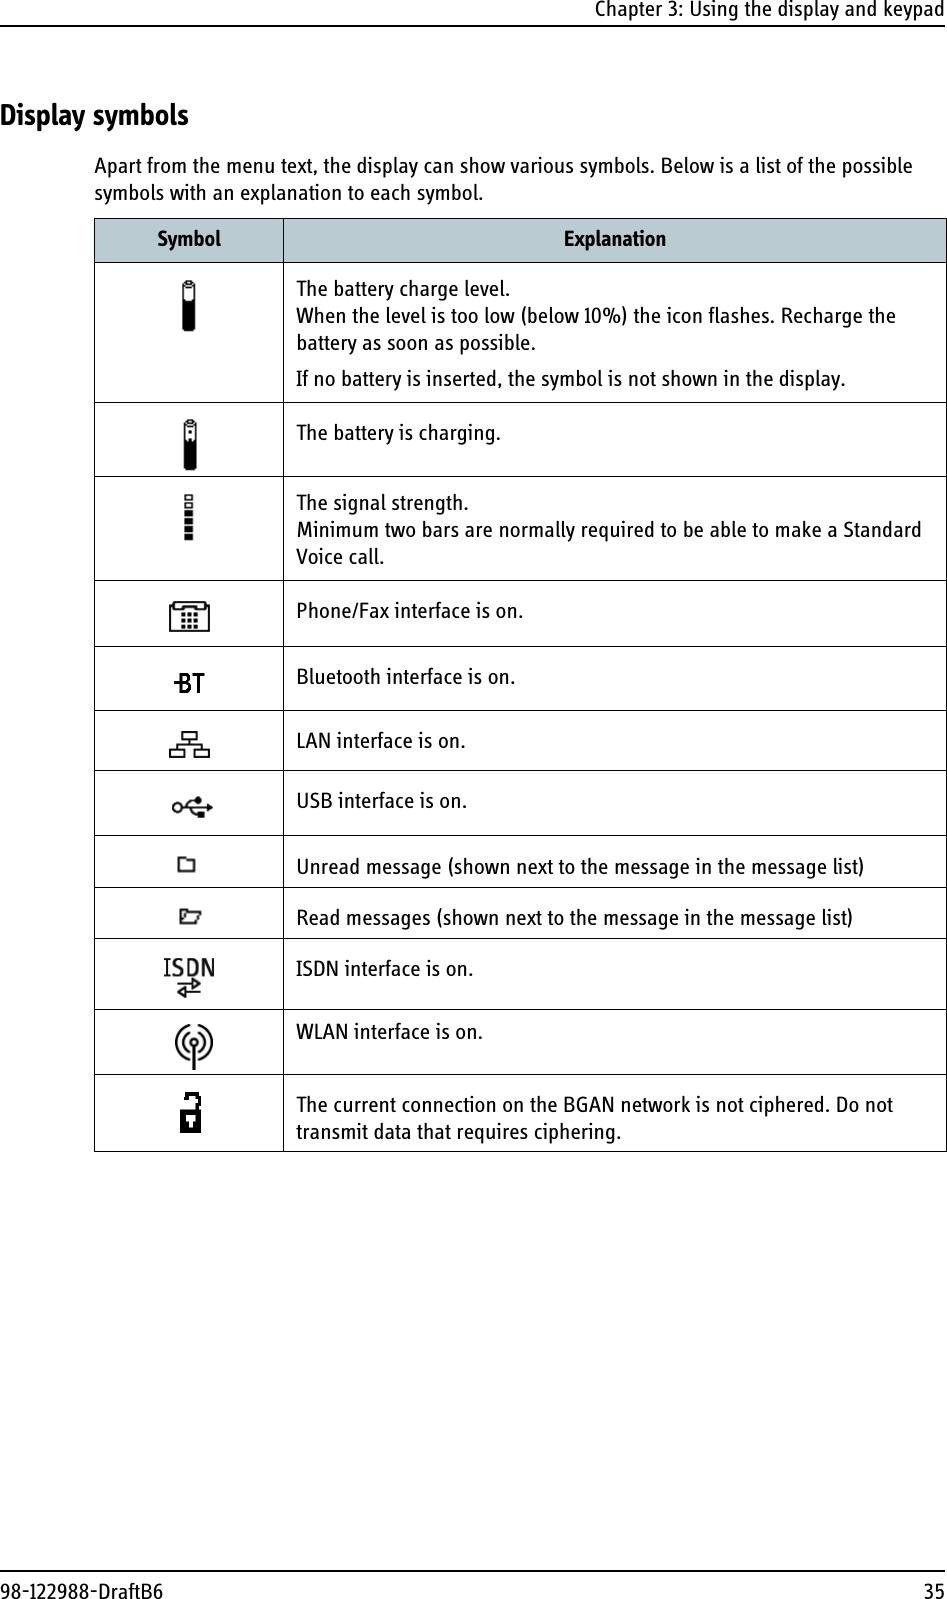 Chapter 3: Using the display and keypad98-122988-DraftB6 35Display symbolsApart from the menu text, the display can show various symbols. Below is a list of the possible symbols with an explanation to each symbol.Symbol ExplanationThe battery charge level. When the level is too low (below 10%) the icon flashes. Recharge the battery as soon as possible.If no battery is inserted, the symbol is not shown in the display.The battery is charging.The signal strength. Minimum two bars are normally required to be able to make a Standard Voice call. Phone/Fax interface is on.Bluetooth interface is on.LAN interface is on. USB interface is on.Unread message (shown next to the message in the message list)Read messages (shown next to the message in the message list)ISDN interface is on.WLAN interface is on.The current connection on the BGAN network is not ciphered. Do not transmit data that requires ciphering.